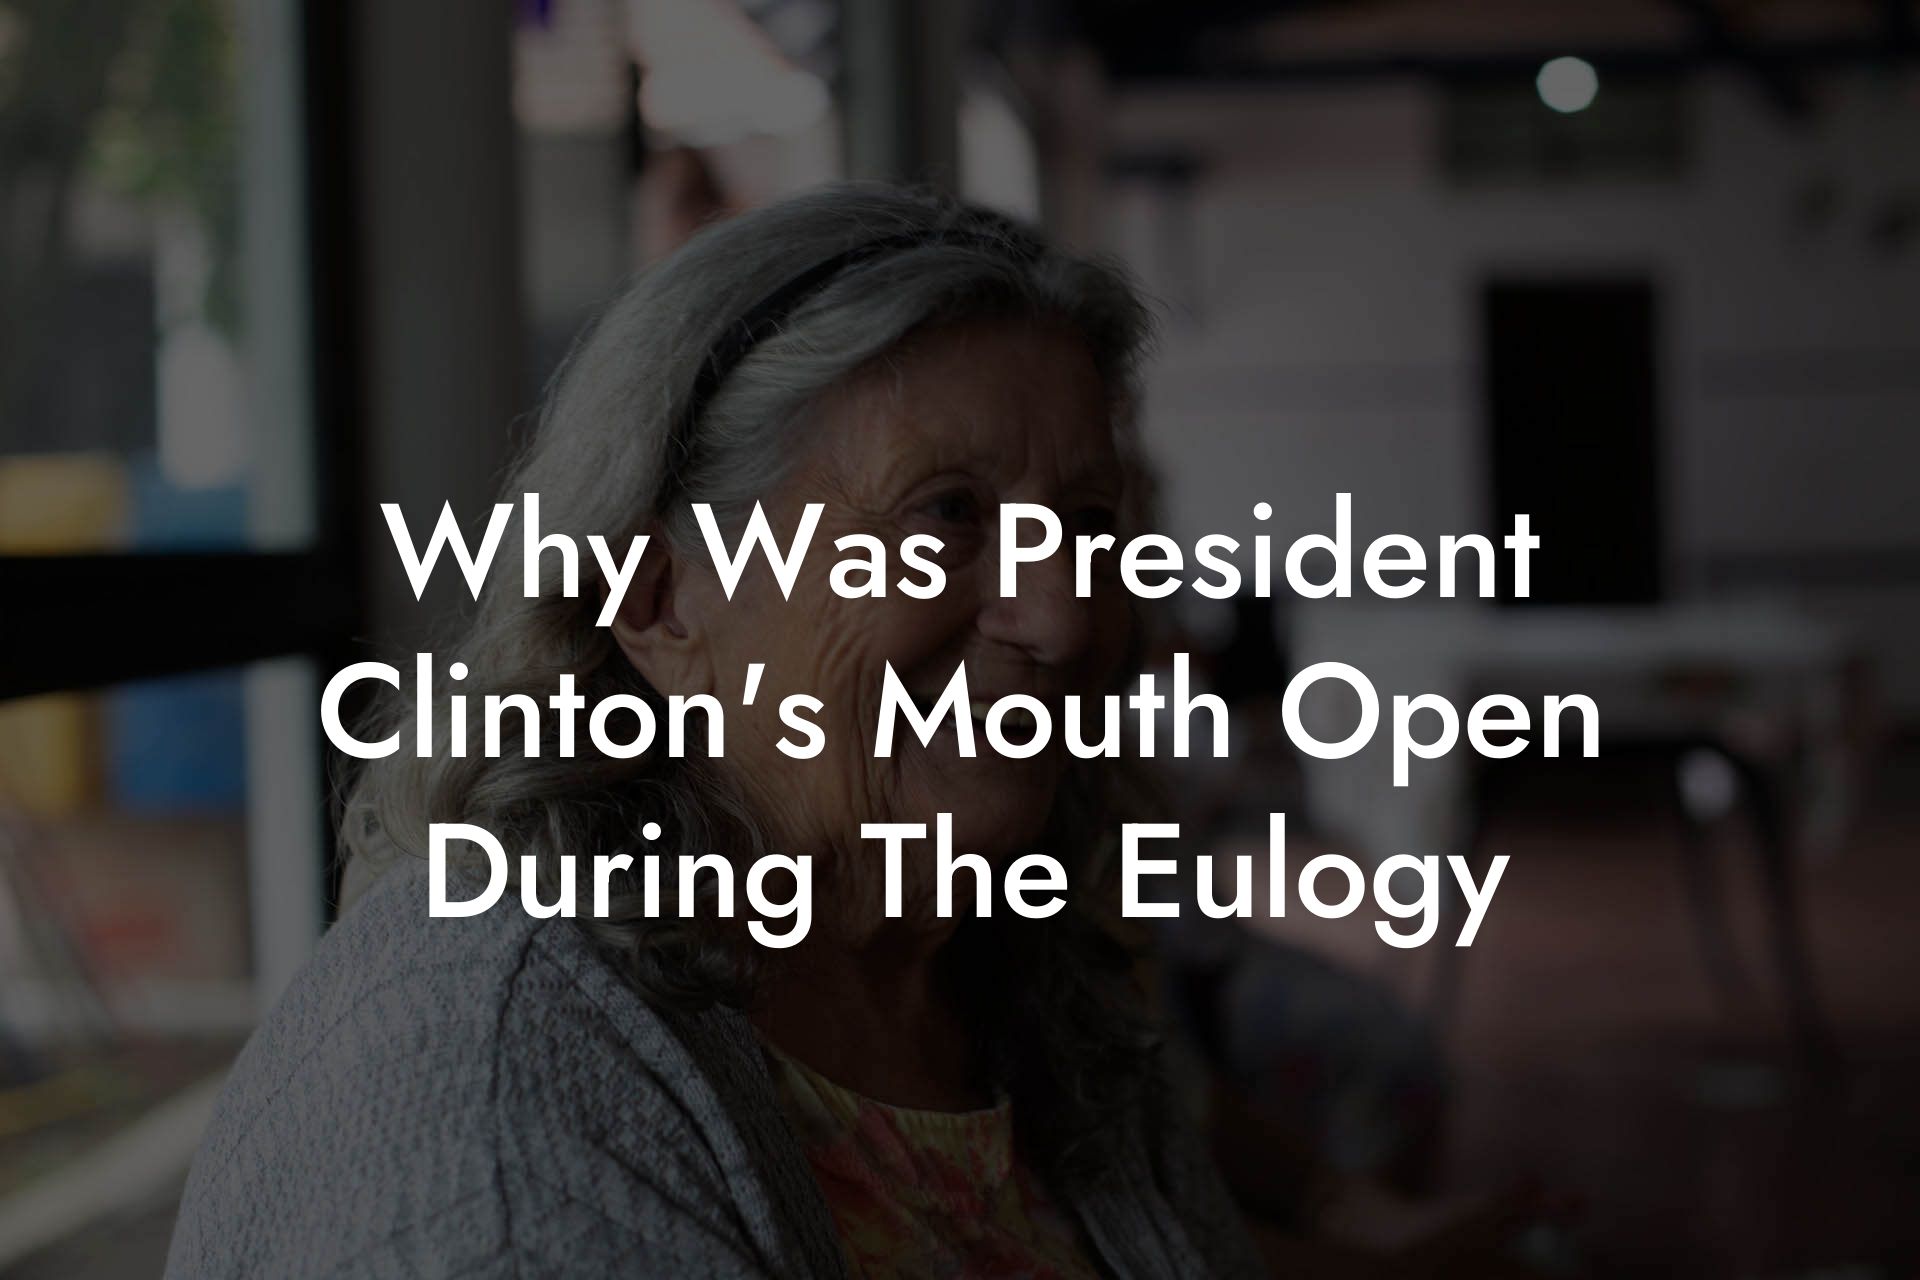 Why Was President Clinton's Mouth Open During The Eulogy